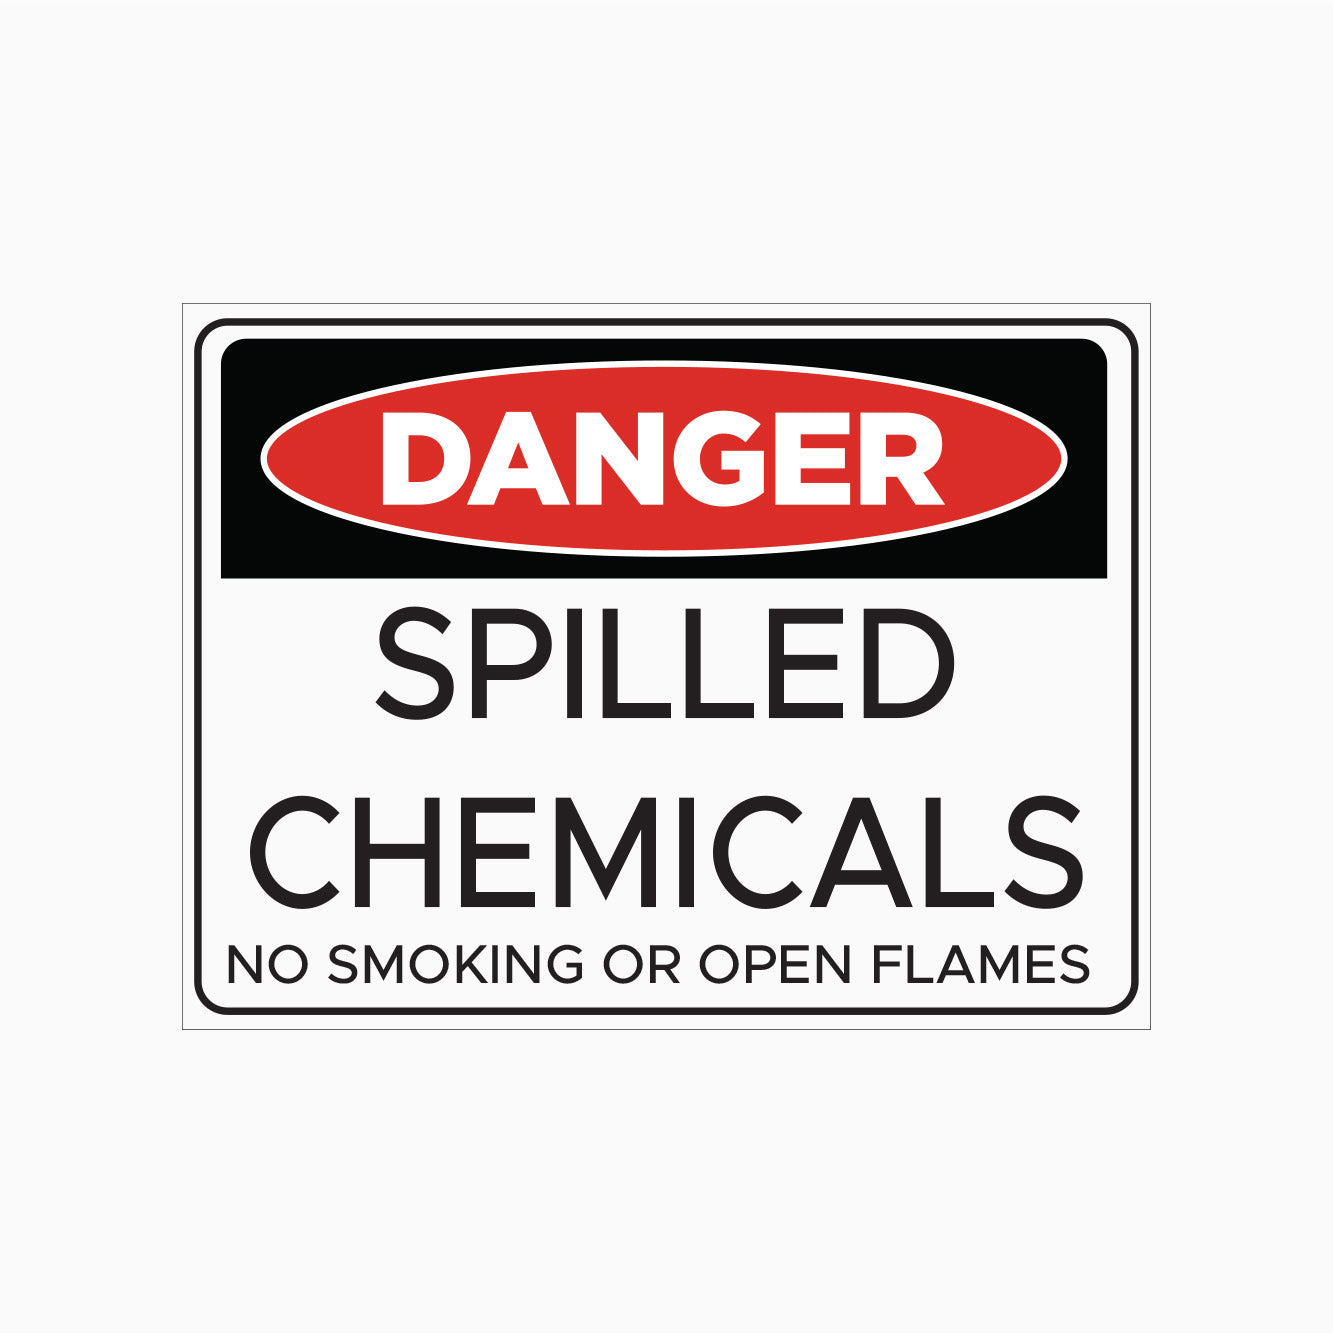 SPILLED CHEMICALS - NO SMOKING OR OPEN FLAMES SIGN - DANGER SIGN